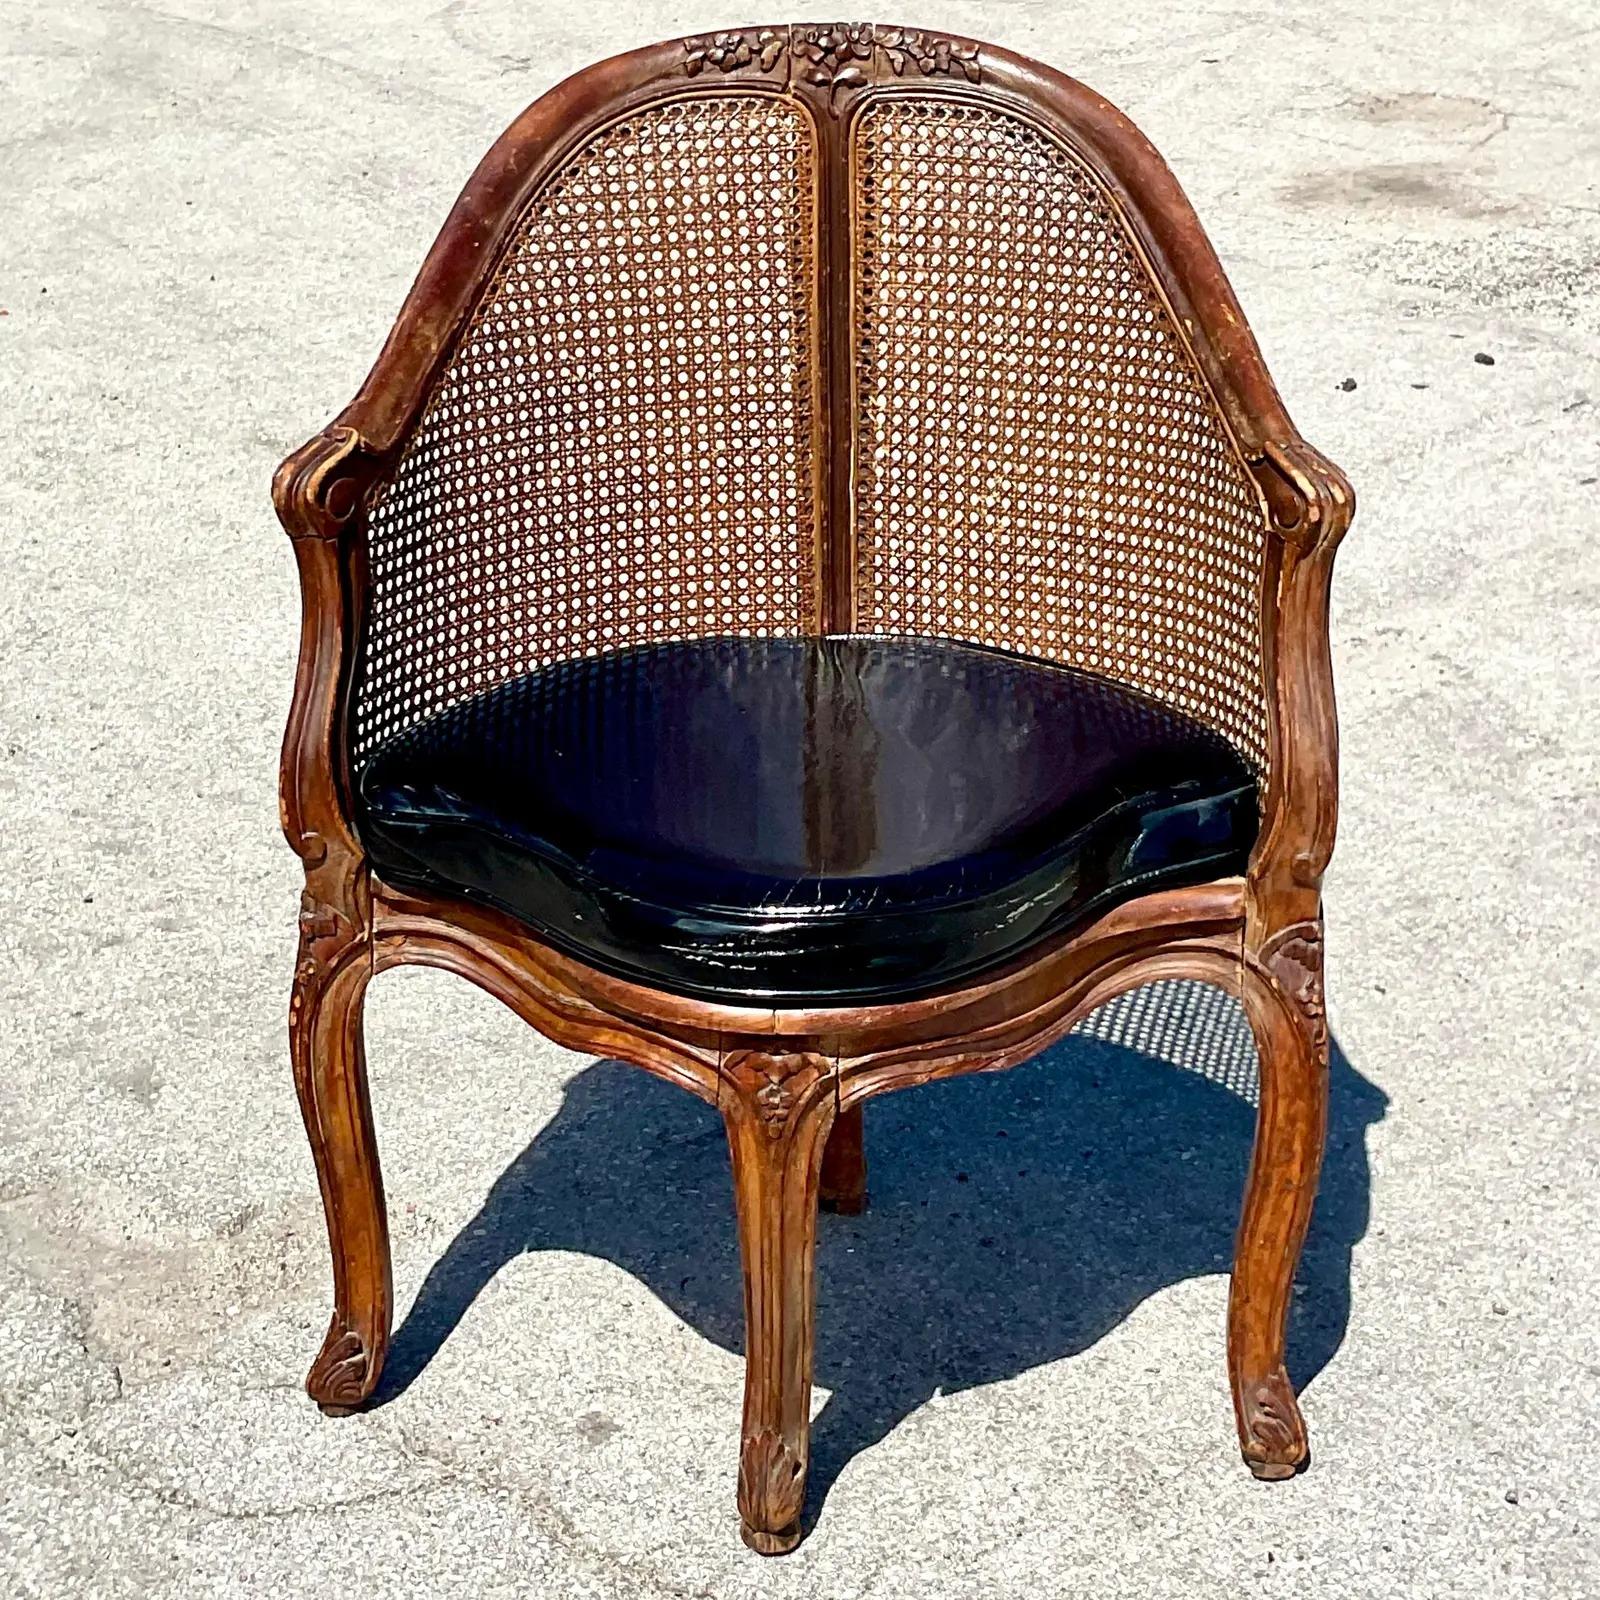 Vintage Regency French cane chairs. A beautiful triangle Bergere shape. Inset cane panels and hard carved details. Acquired from a Palm Beach estate.

The chair is in great vintage condition. Minor scuffs and blemishes appropriate to its age and